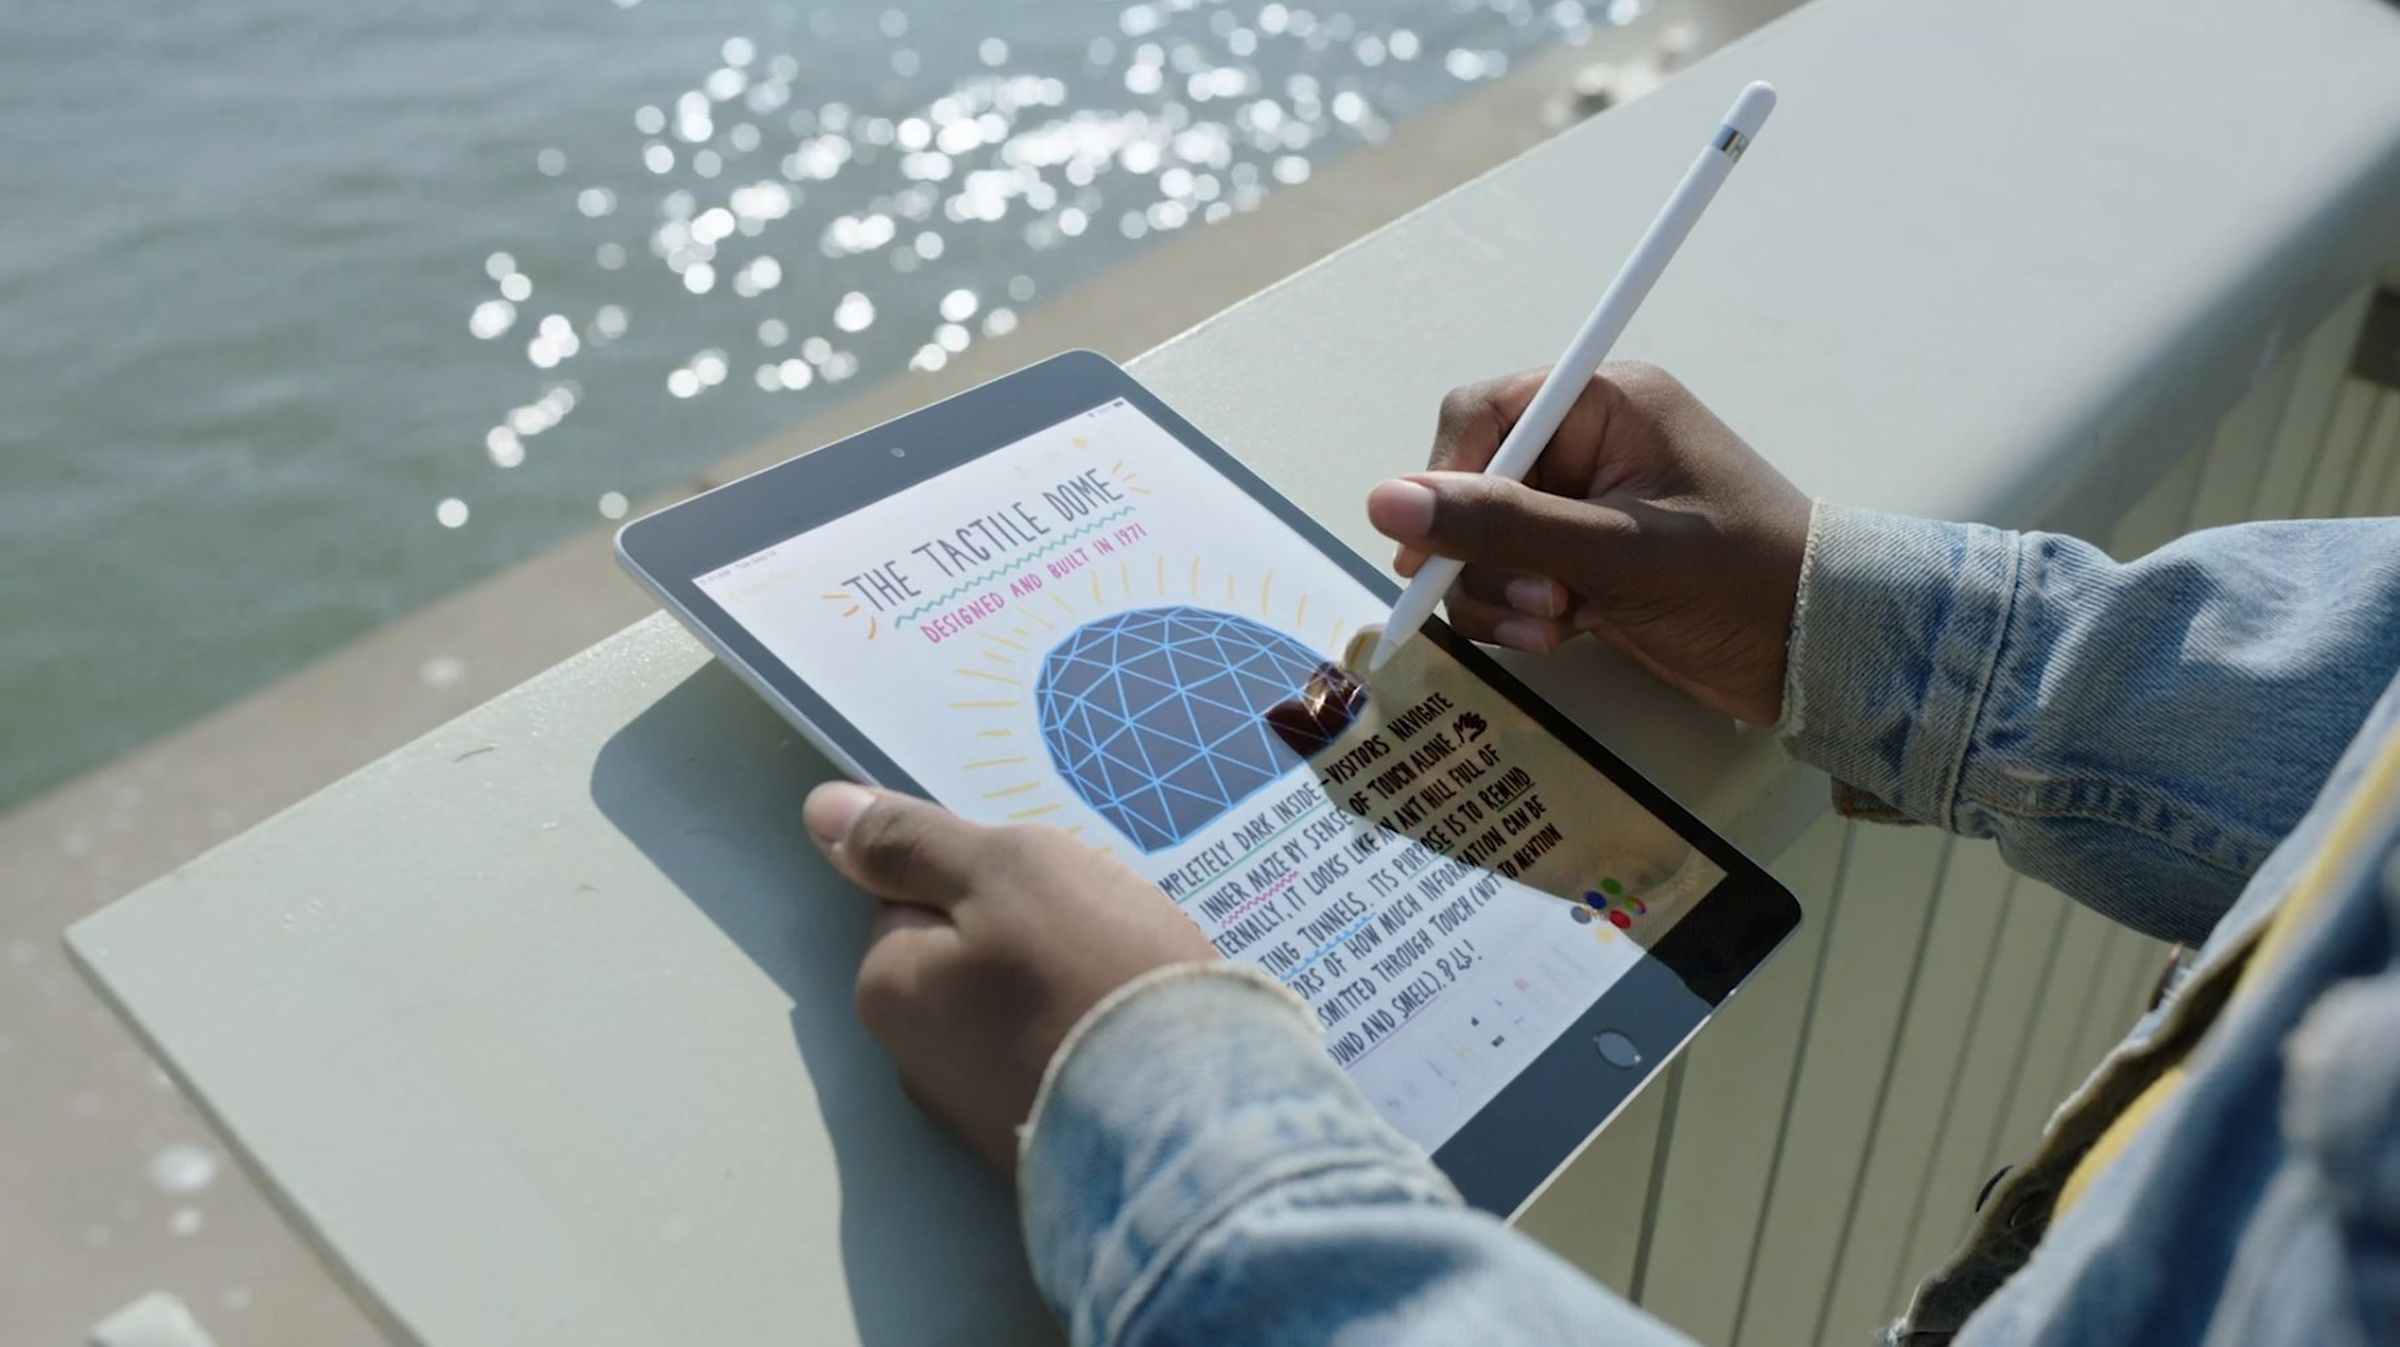 The 9th Gen iPad supports the first-generation Apple Pencil.